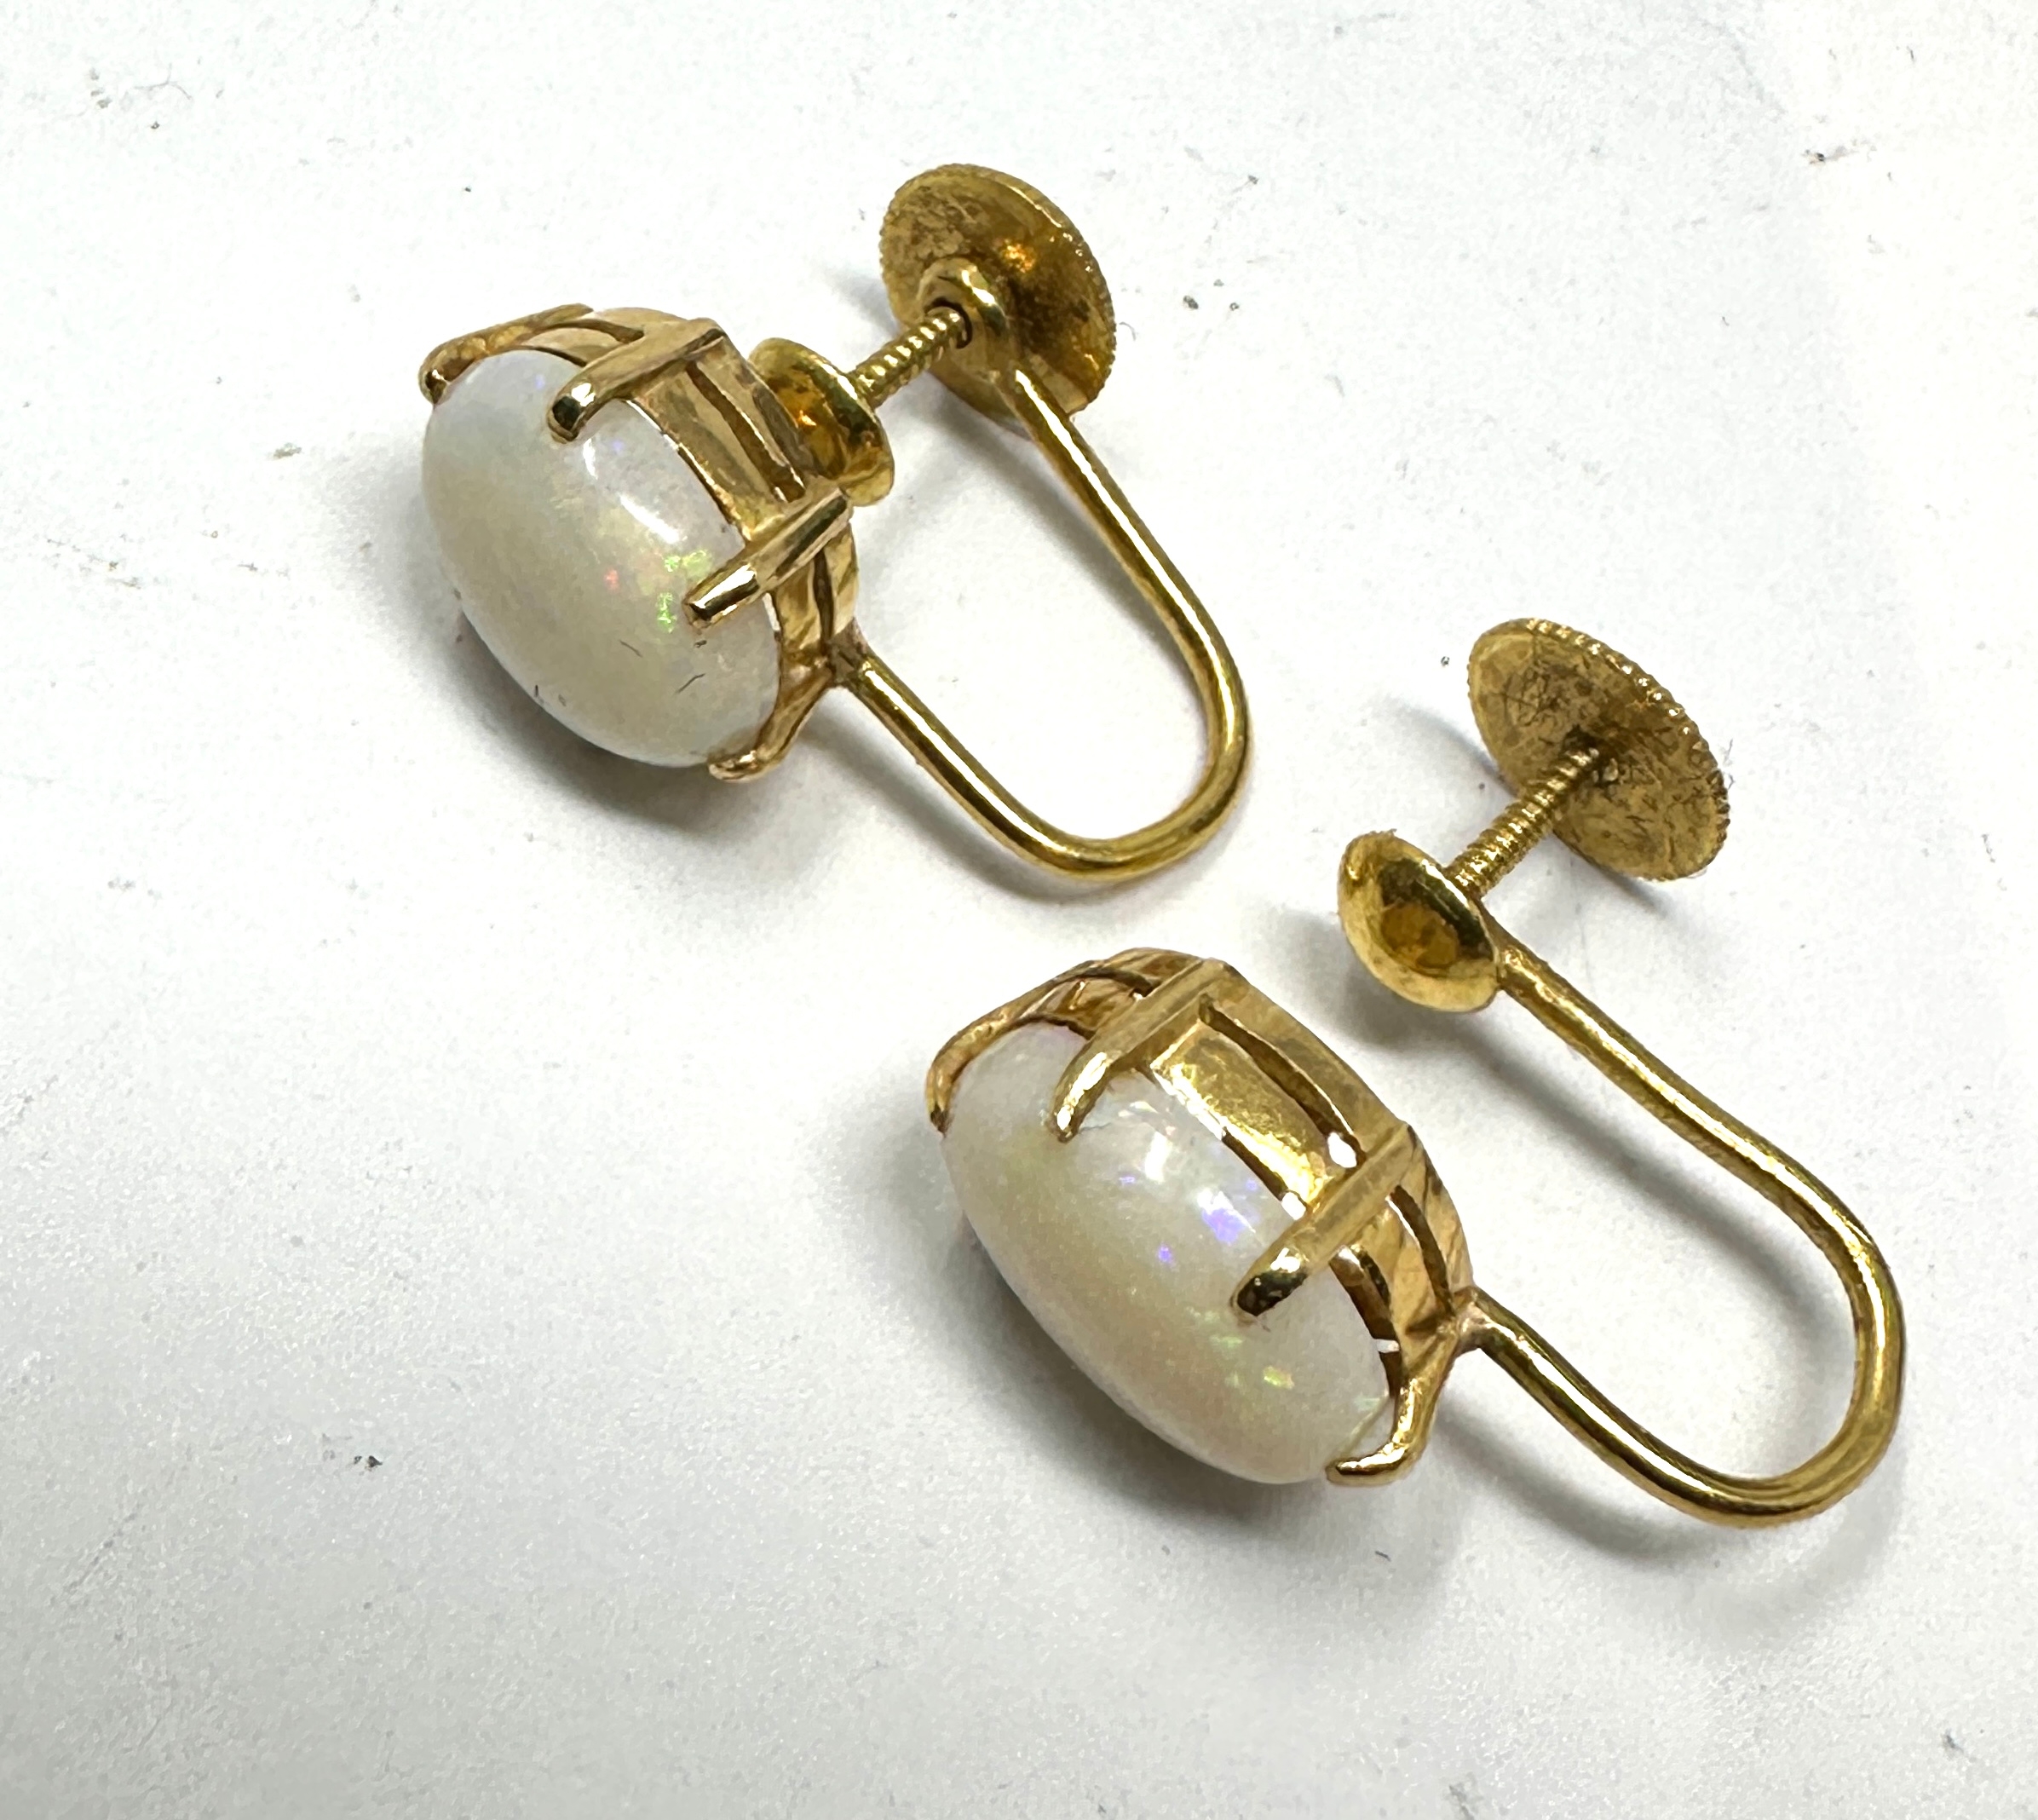 18ct gold opal earrings eack opal measures approx 10mm by 8mm weight 4g xrt tested as 18ct gold - Image 3 of 3